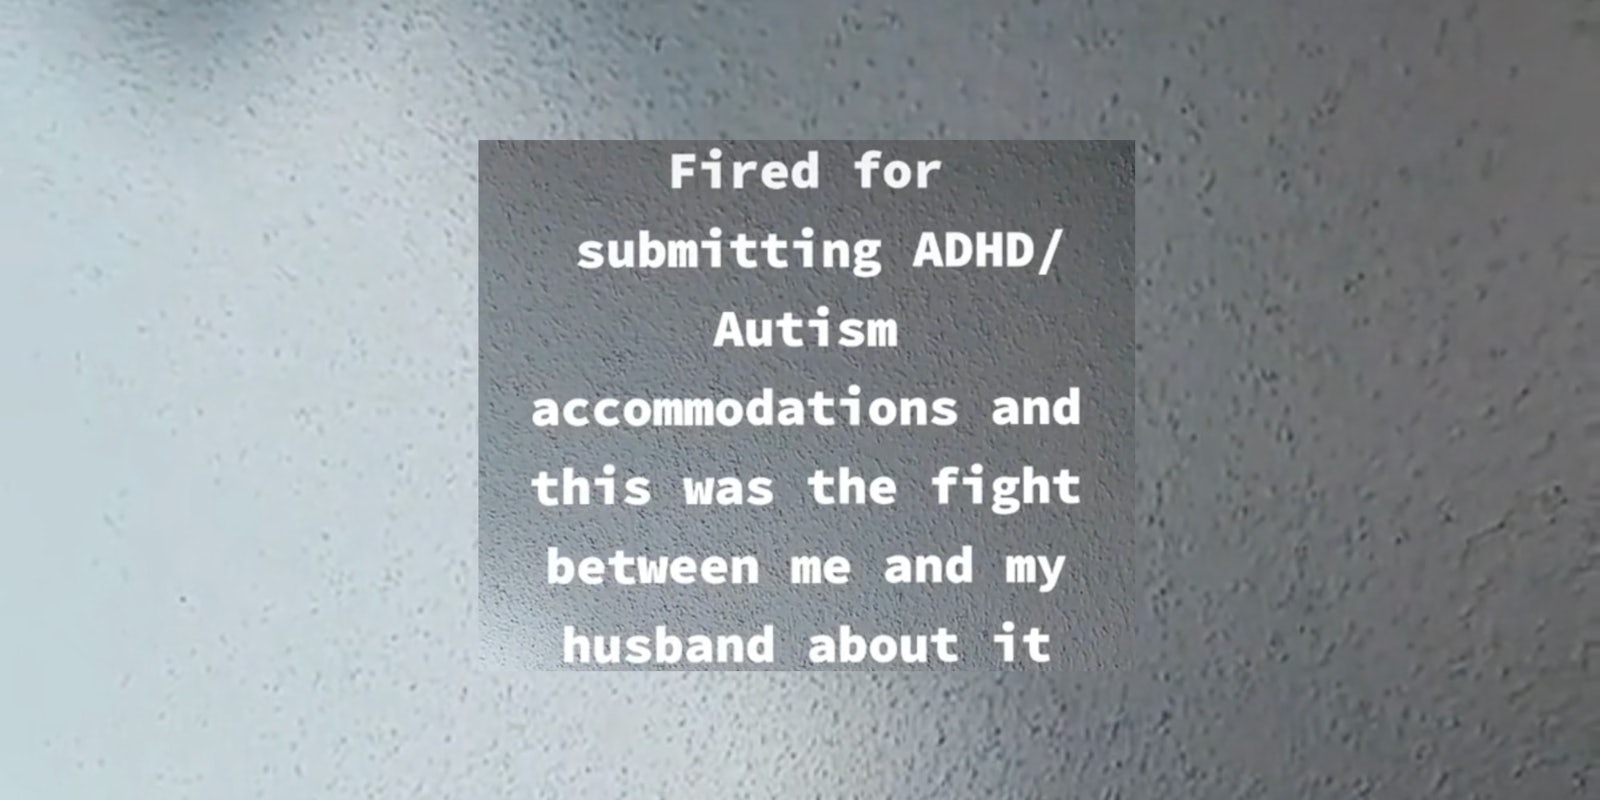 'fired for submitting ADHD/Autism accommodations and this was the fight between me and my husband about it'